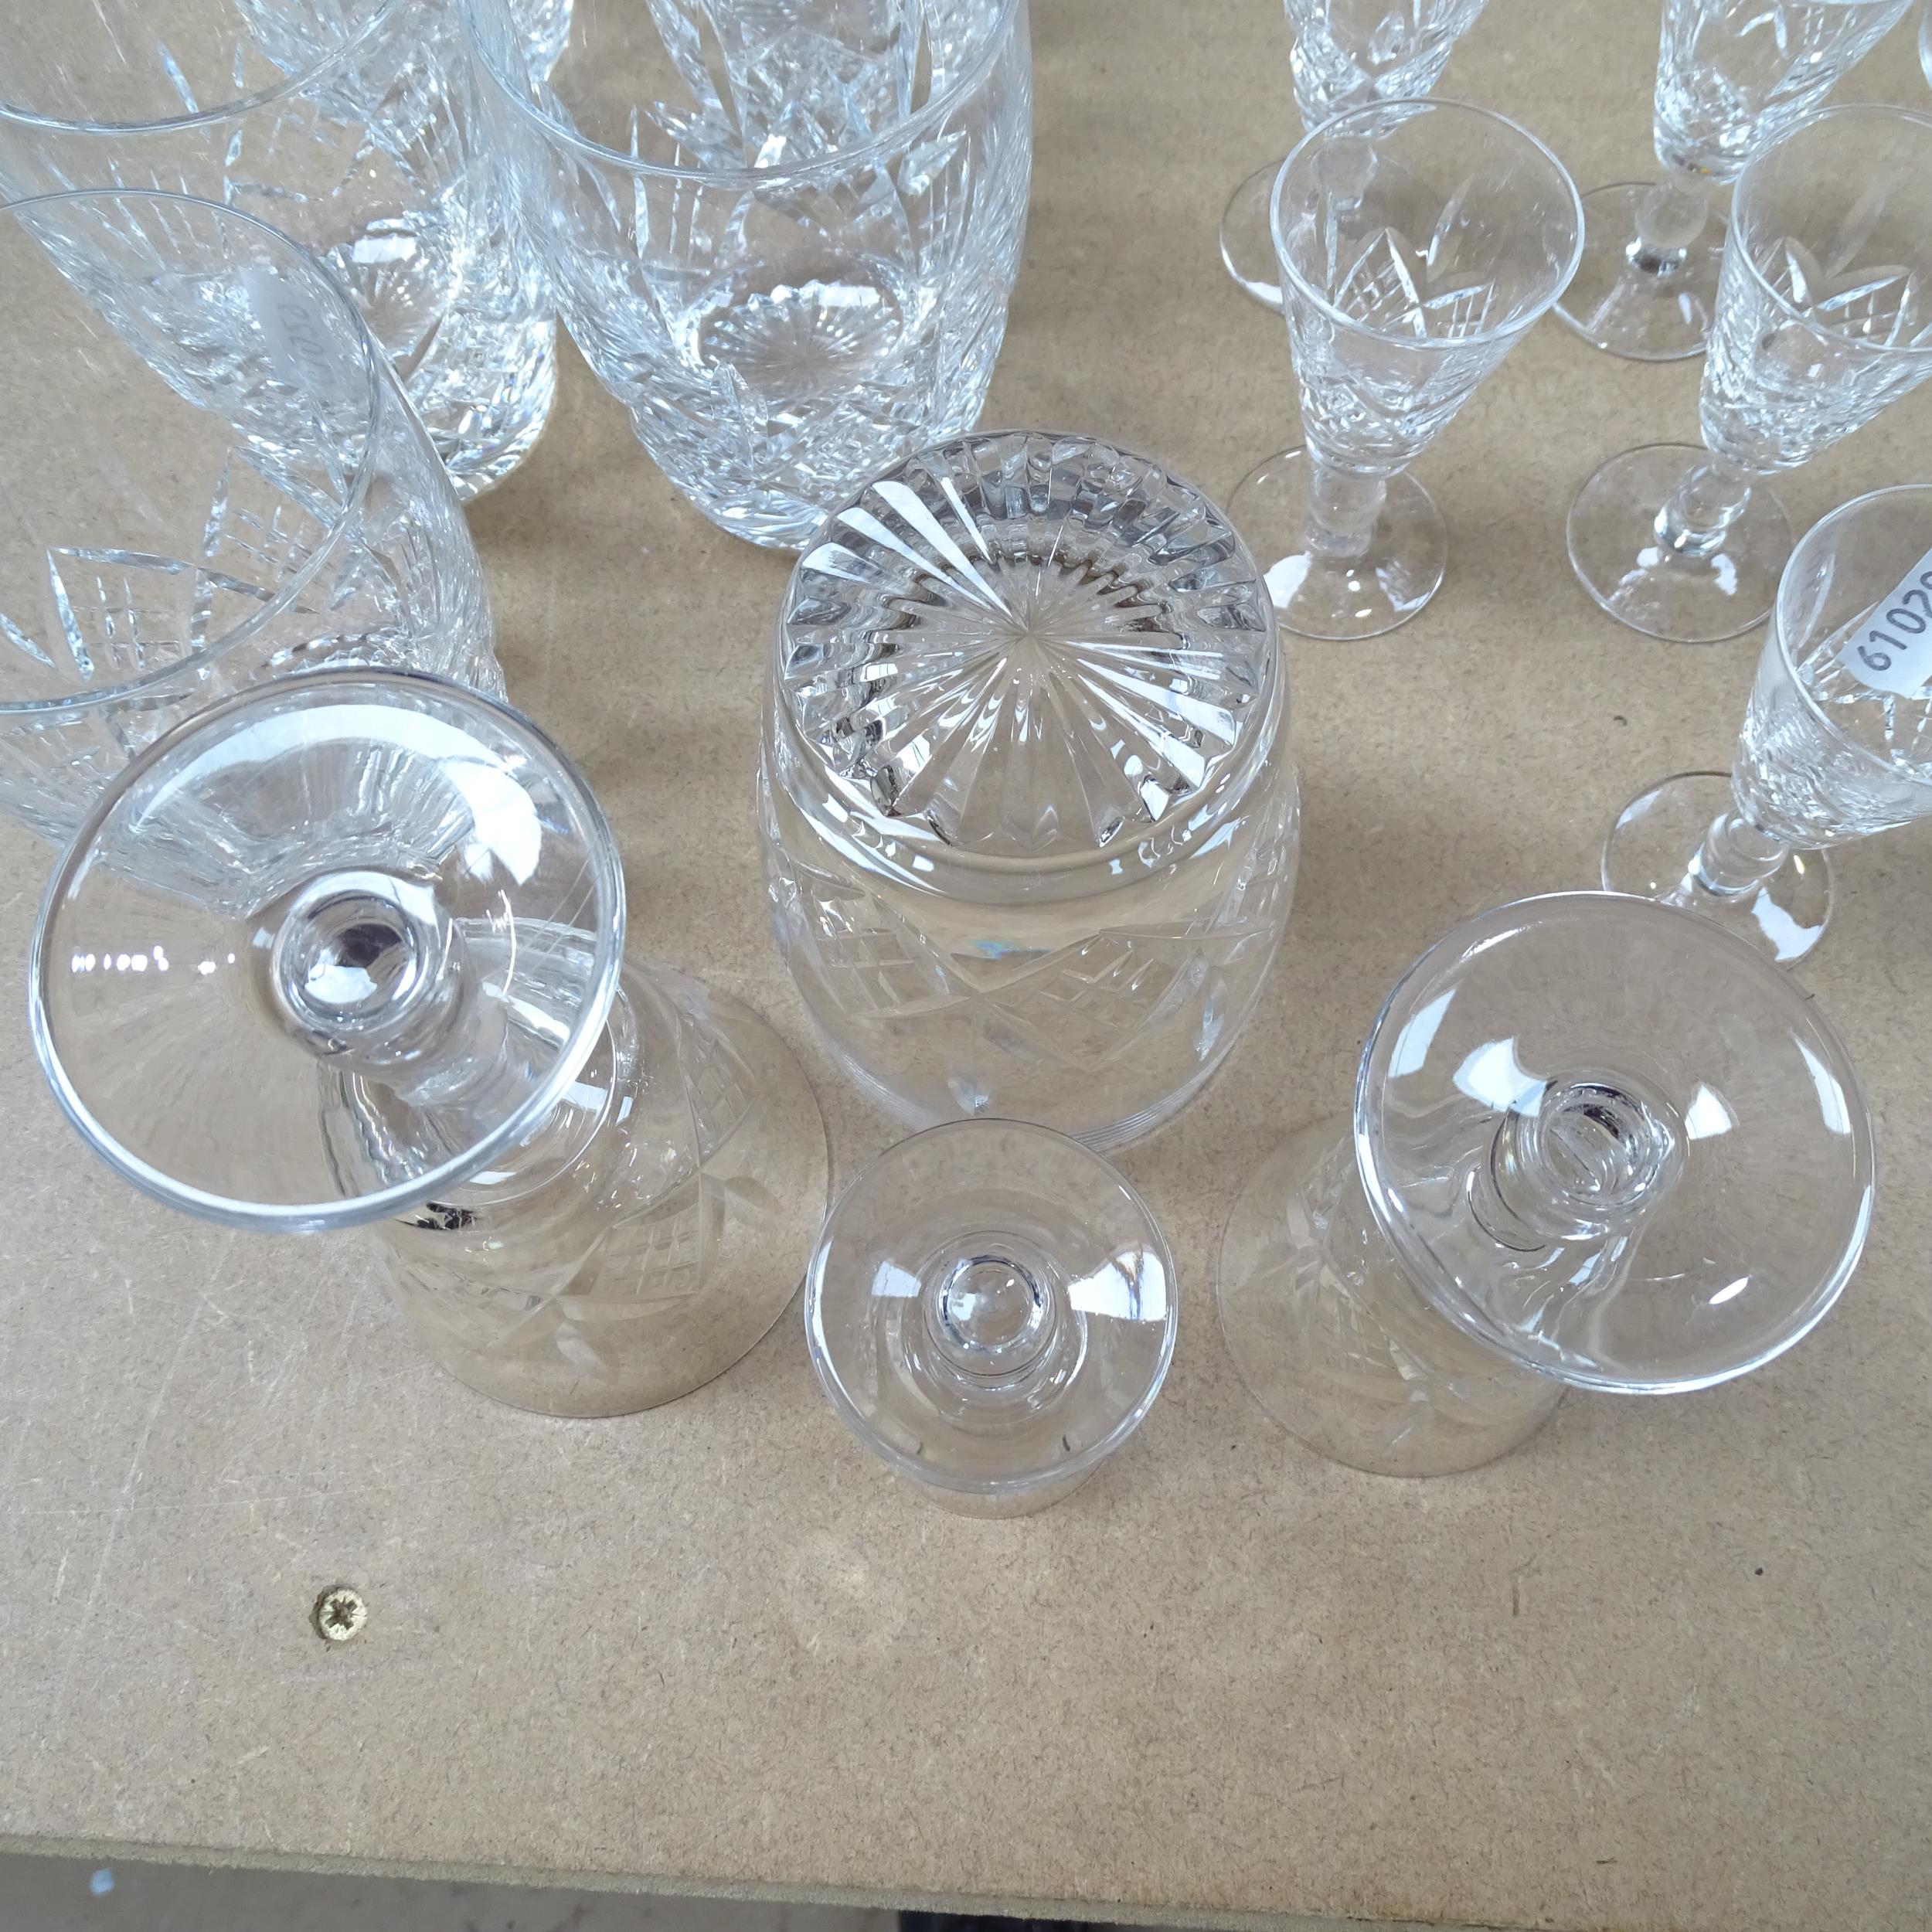 A suite of Stuart crystal glassware in Glengarry pattern, to include 6 Champagne flutes, - Image 2 of 2